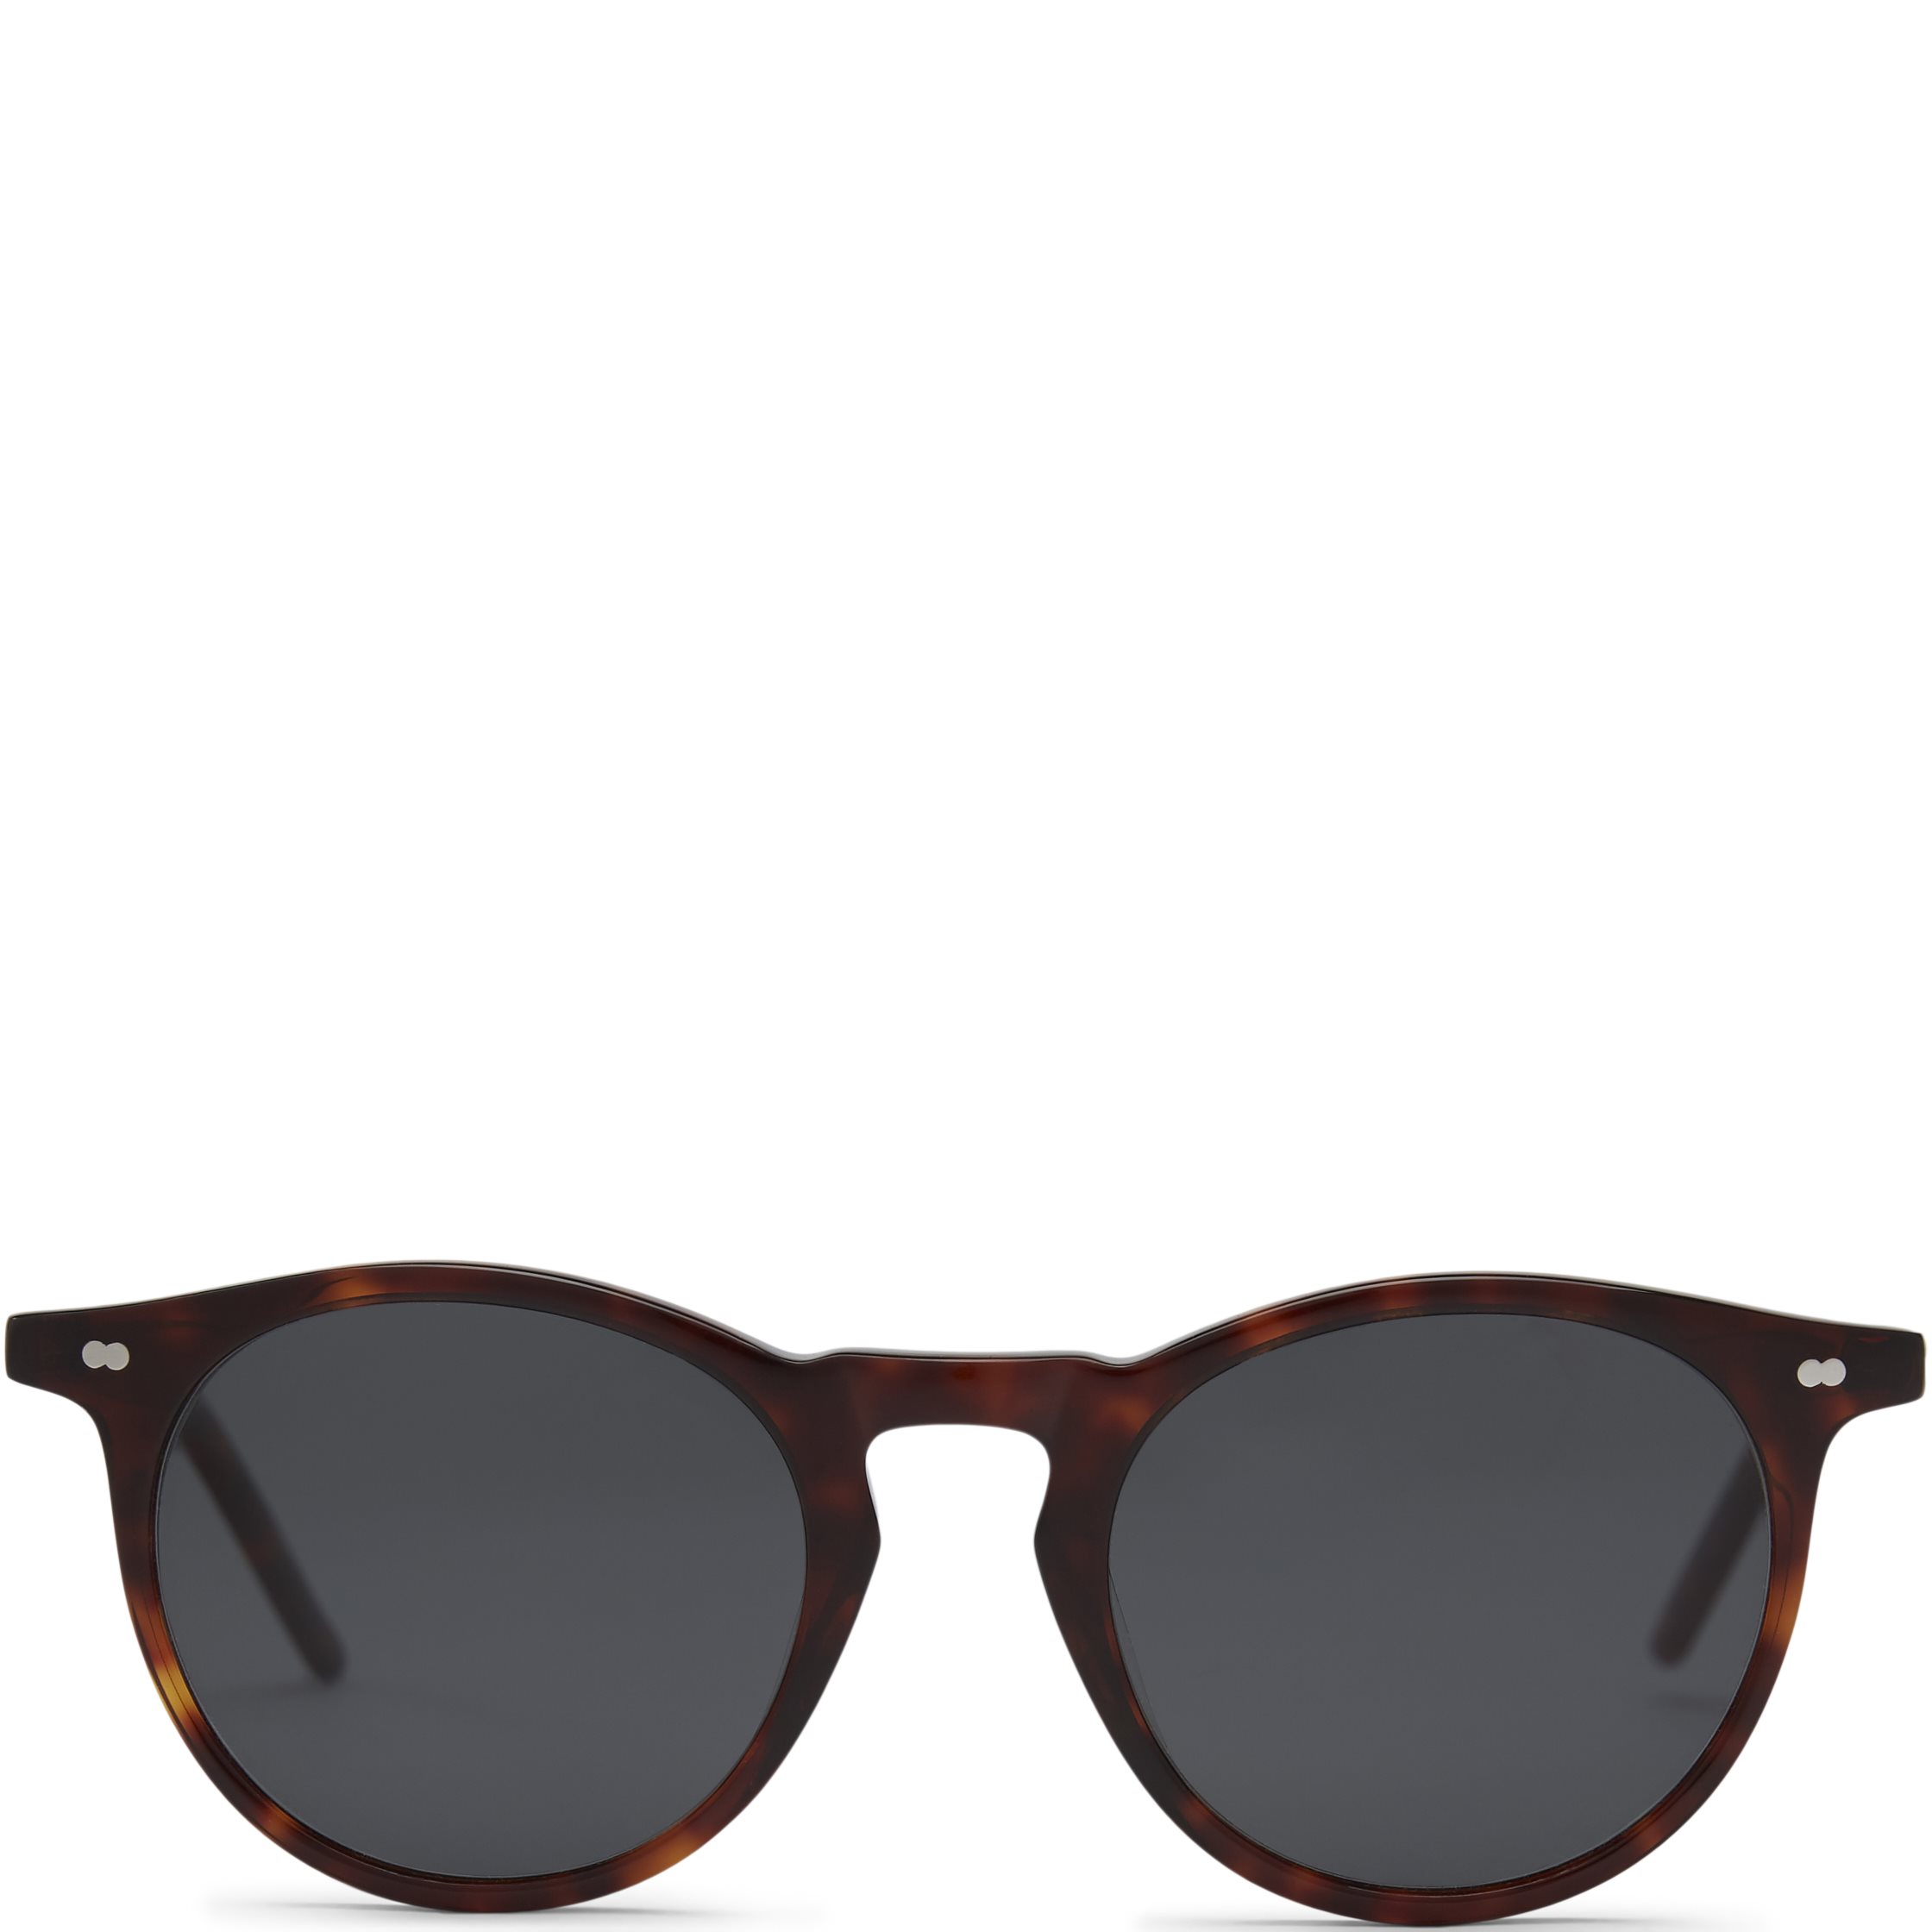 Christopher Cloos Accessories PALOMA SUNGLASSES Brown